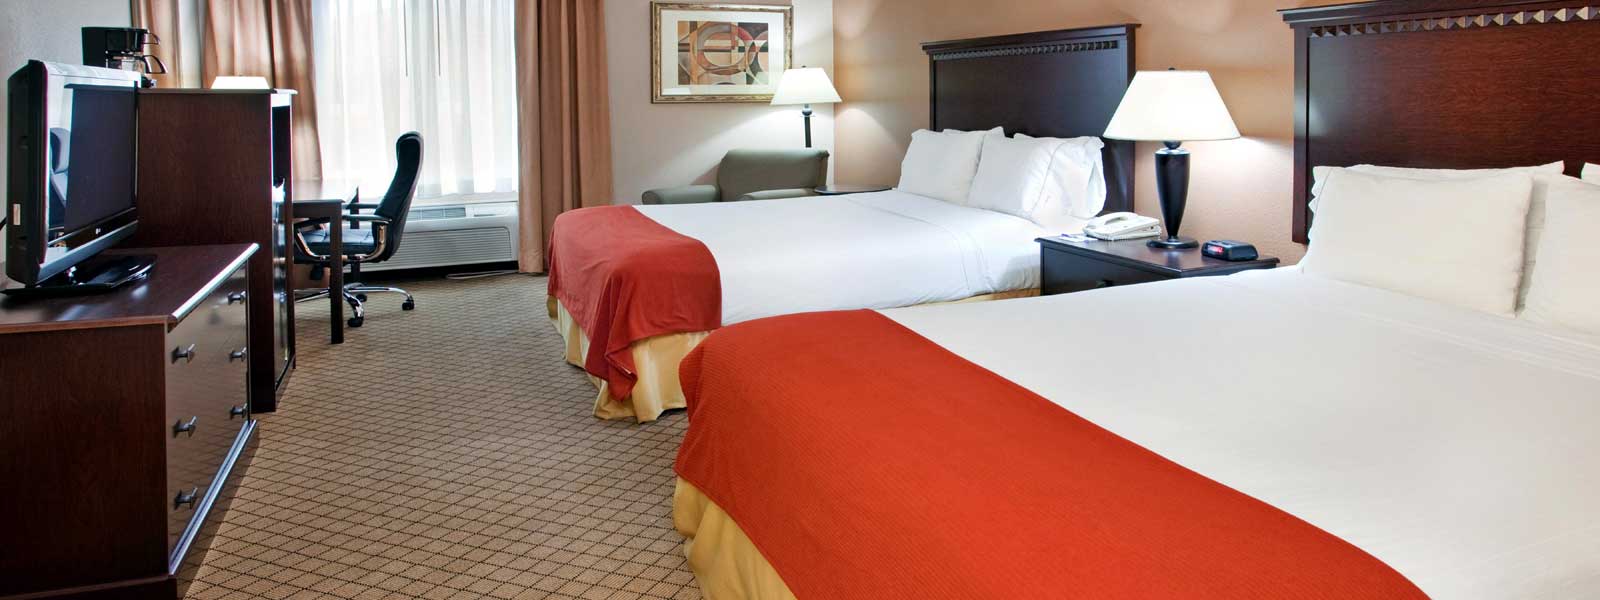 Holiday Inn Express & Suites Liberty Affordable Lodging in Kansas City Missouri Clean Comfortable Rooms Newly Remodeled Close to Downtown